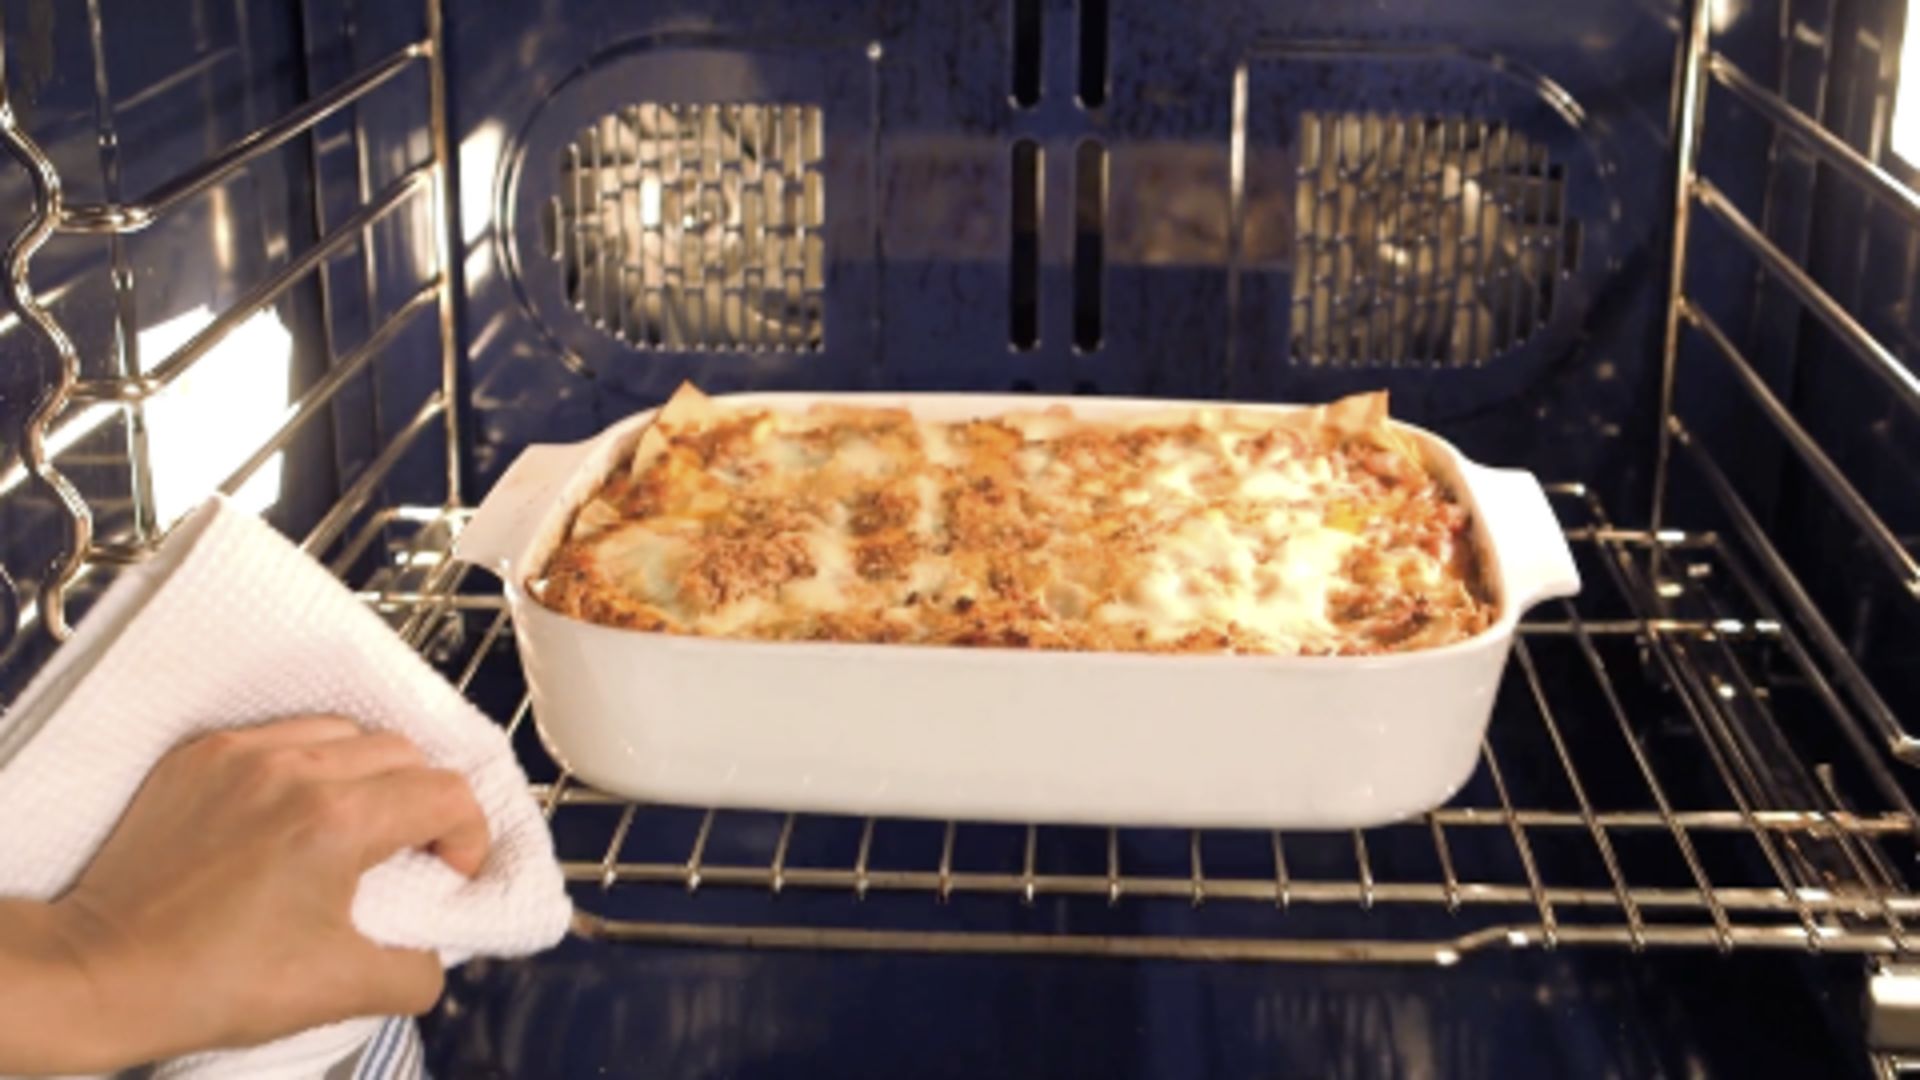 Watch How to Make and Assemble Lasagna From Scratch | Recipes from the ...